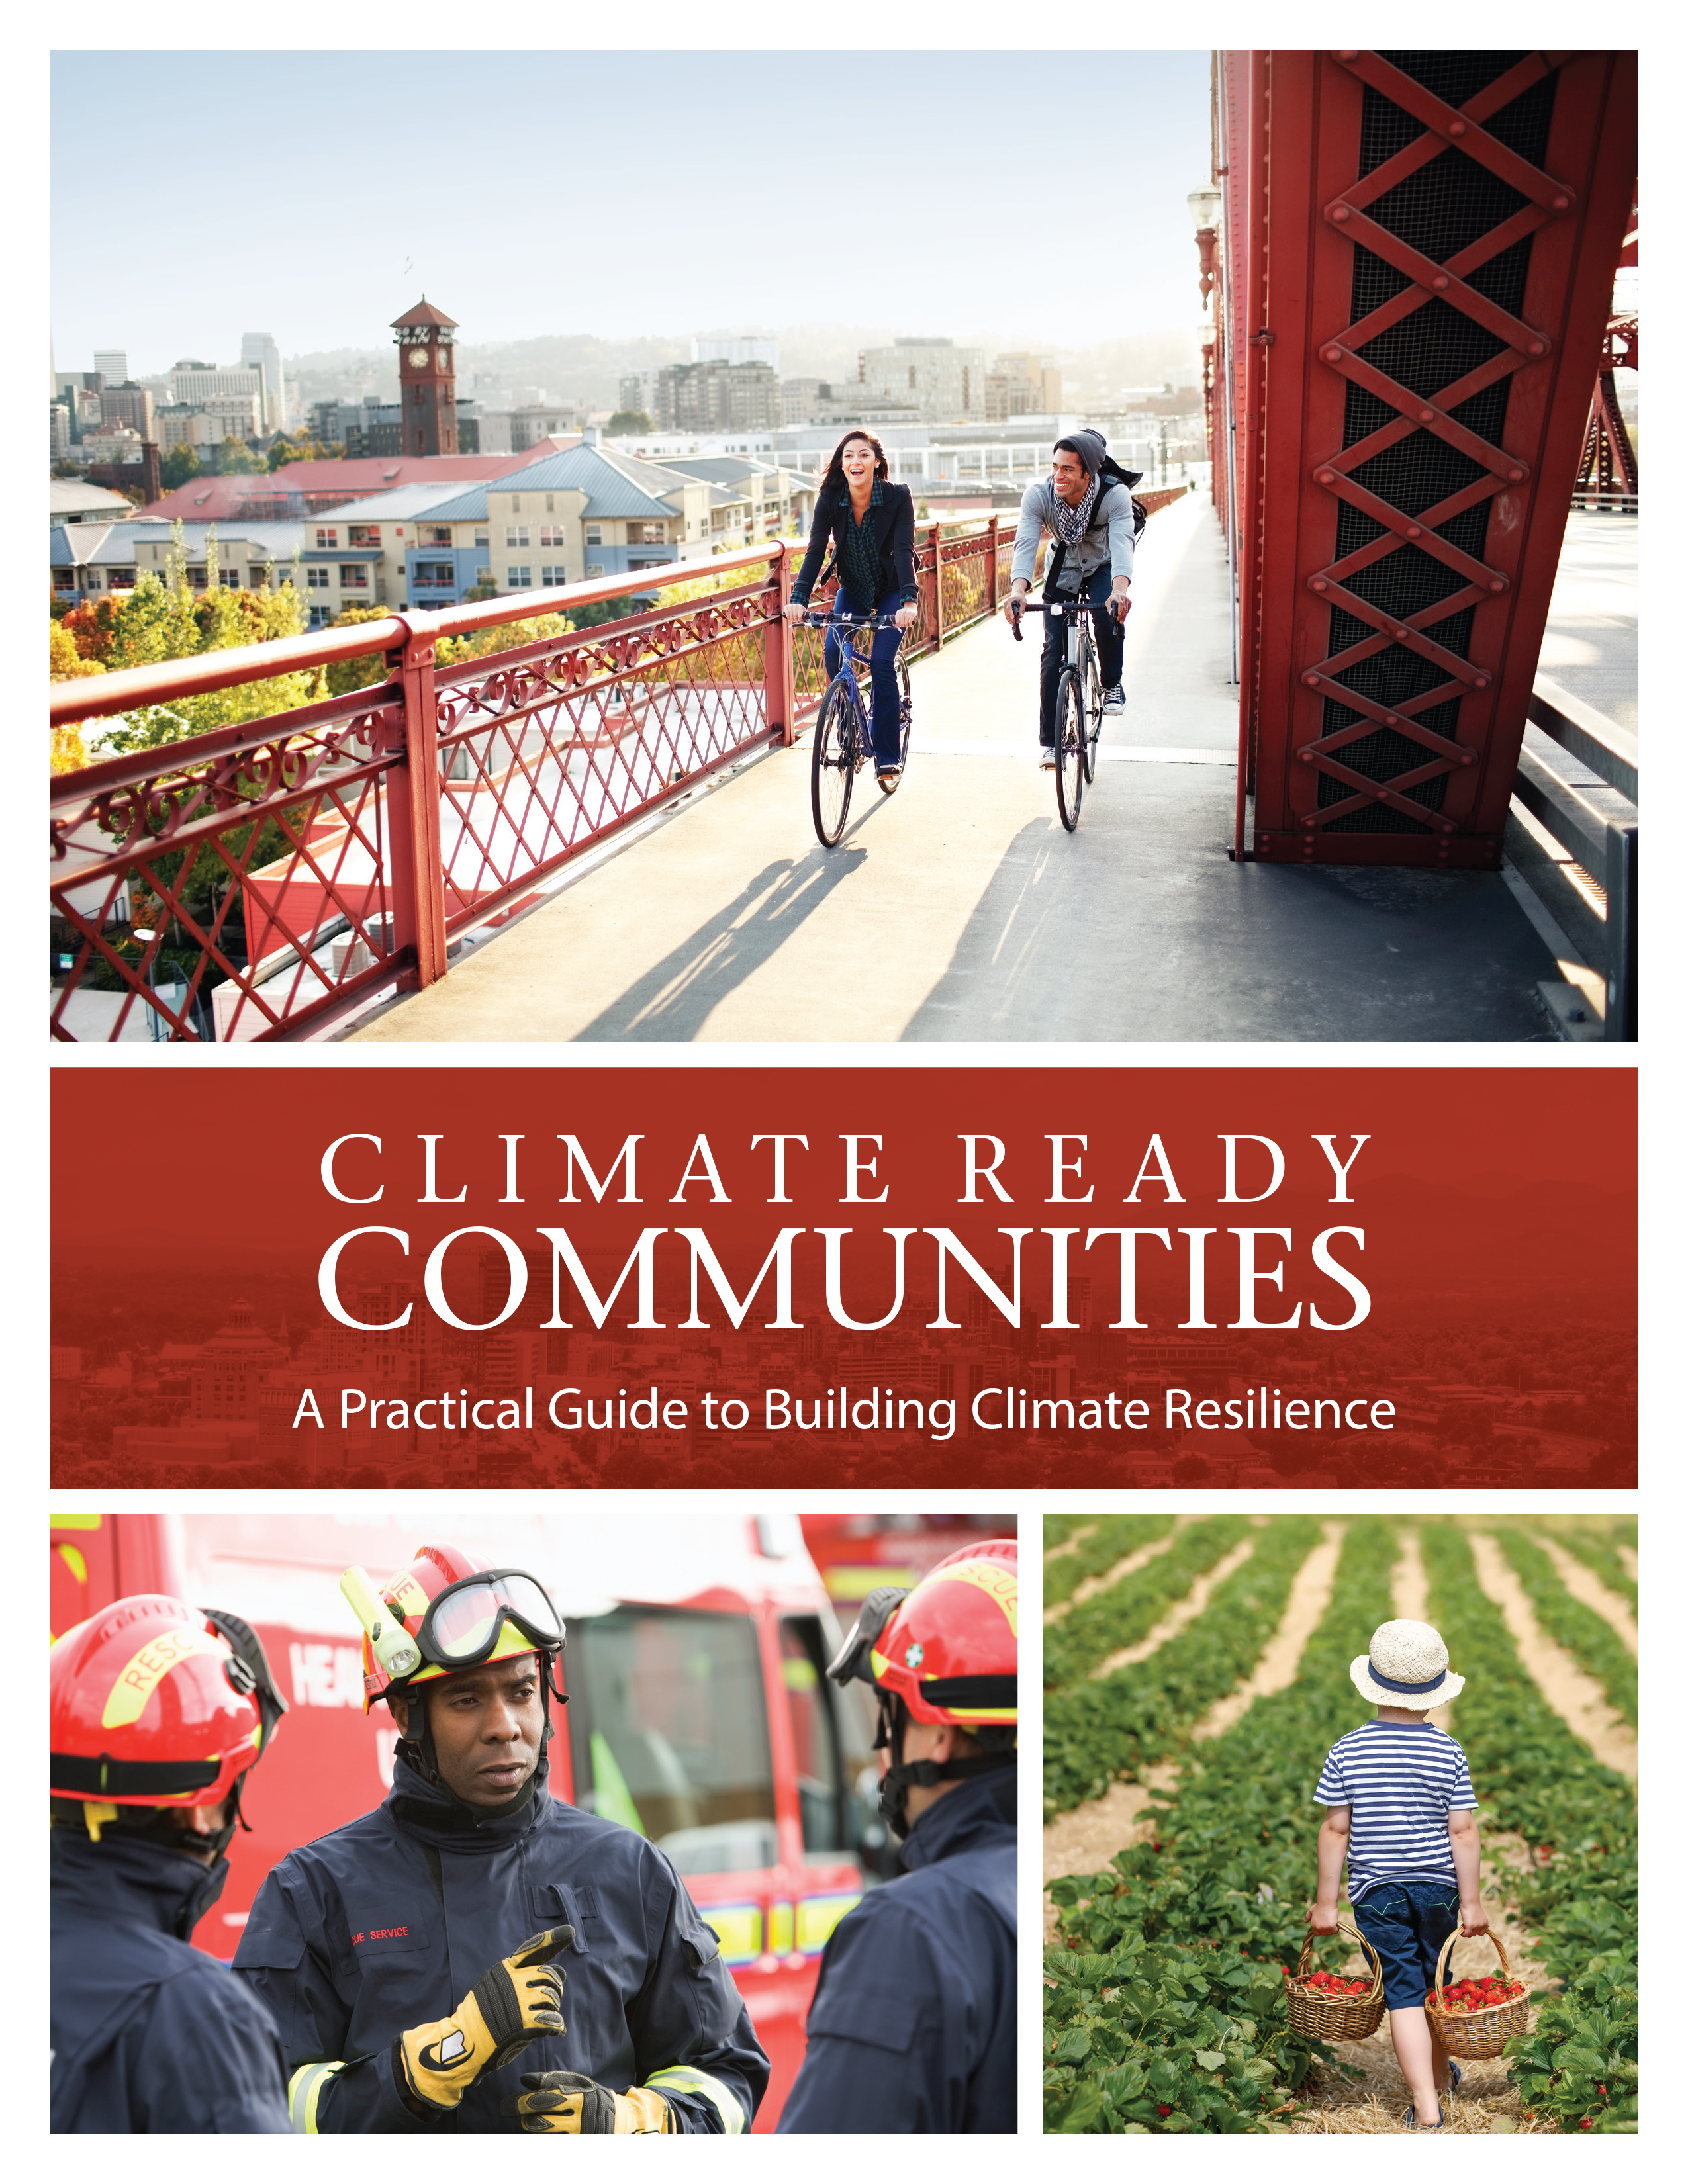 Cover of the Practical Guild to Building Climate Resilience